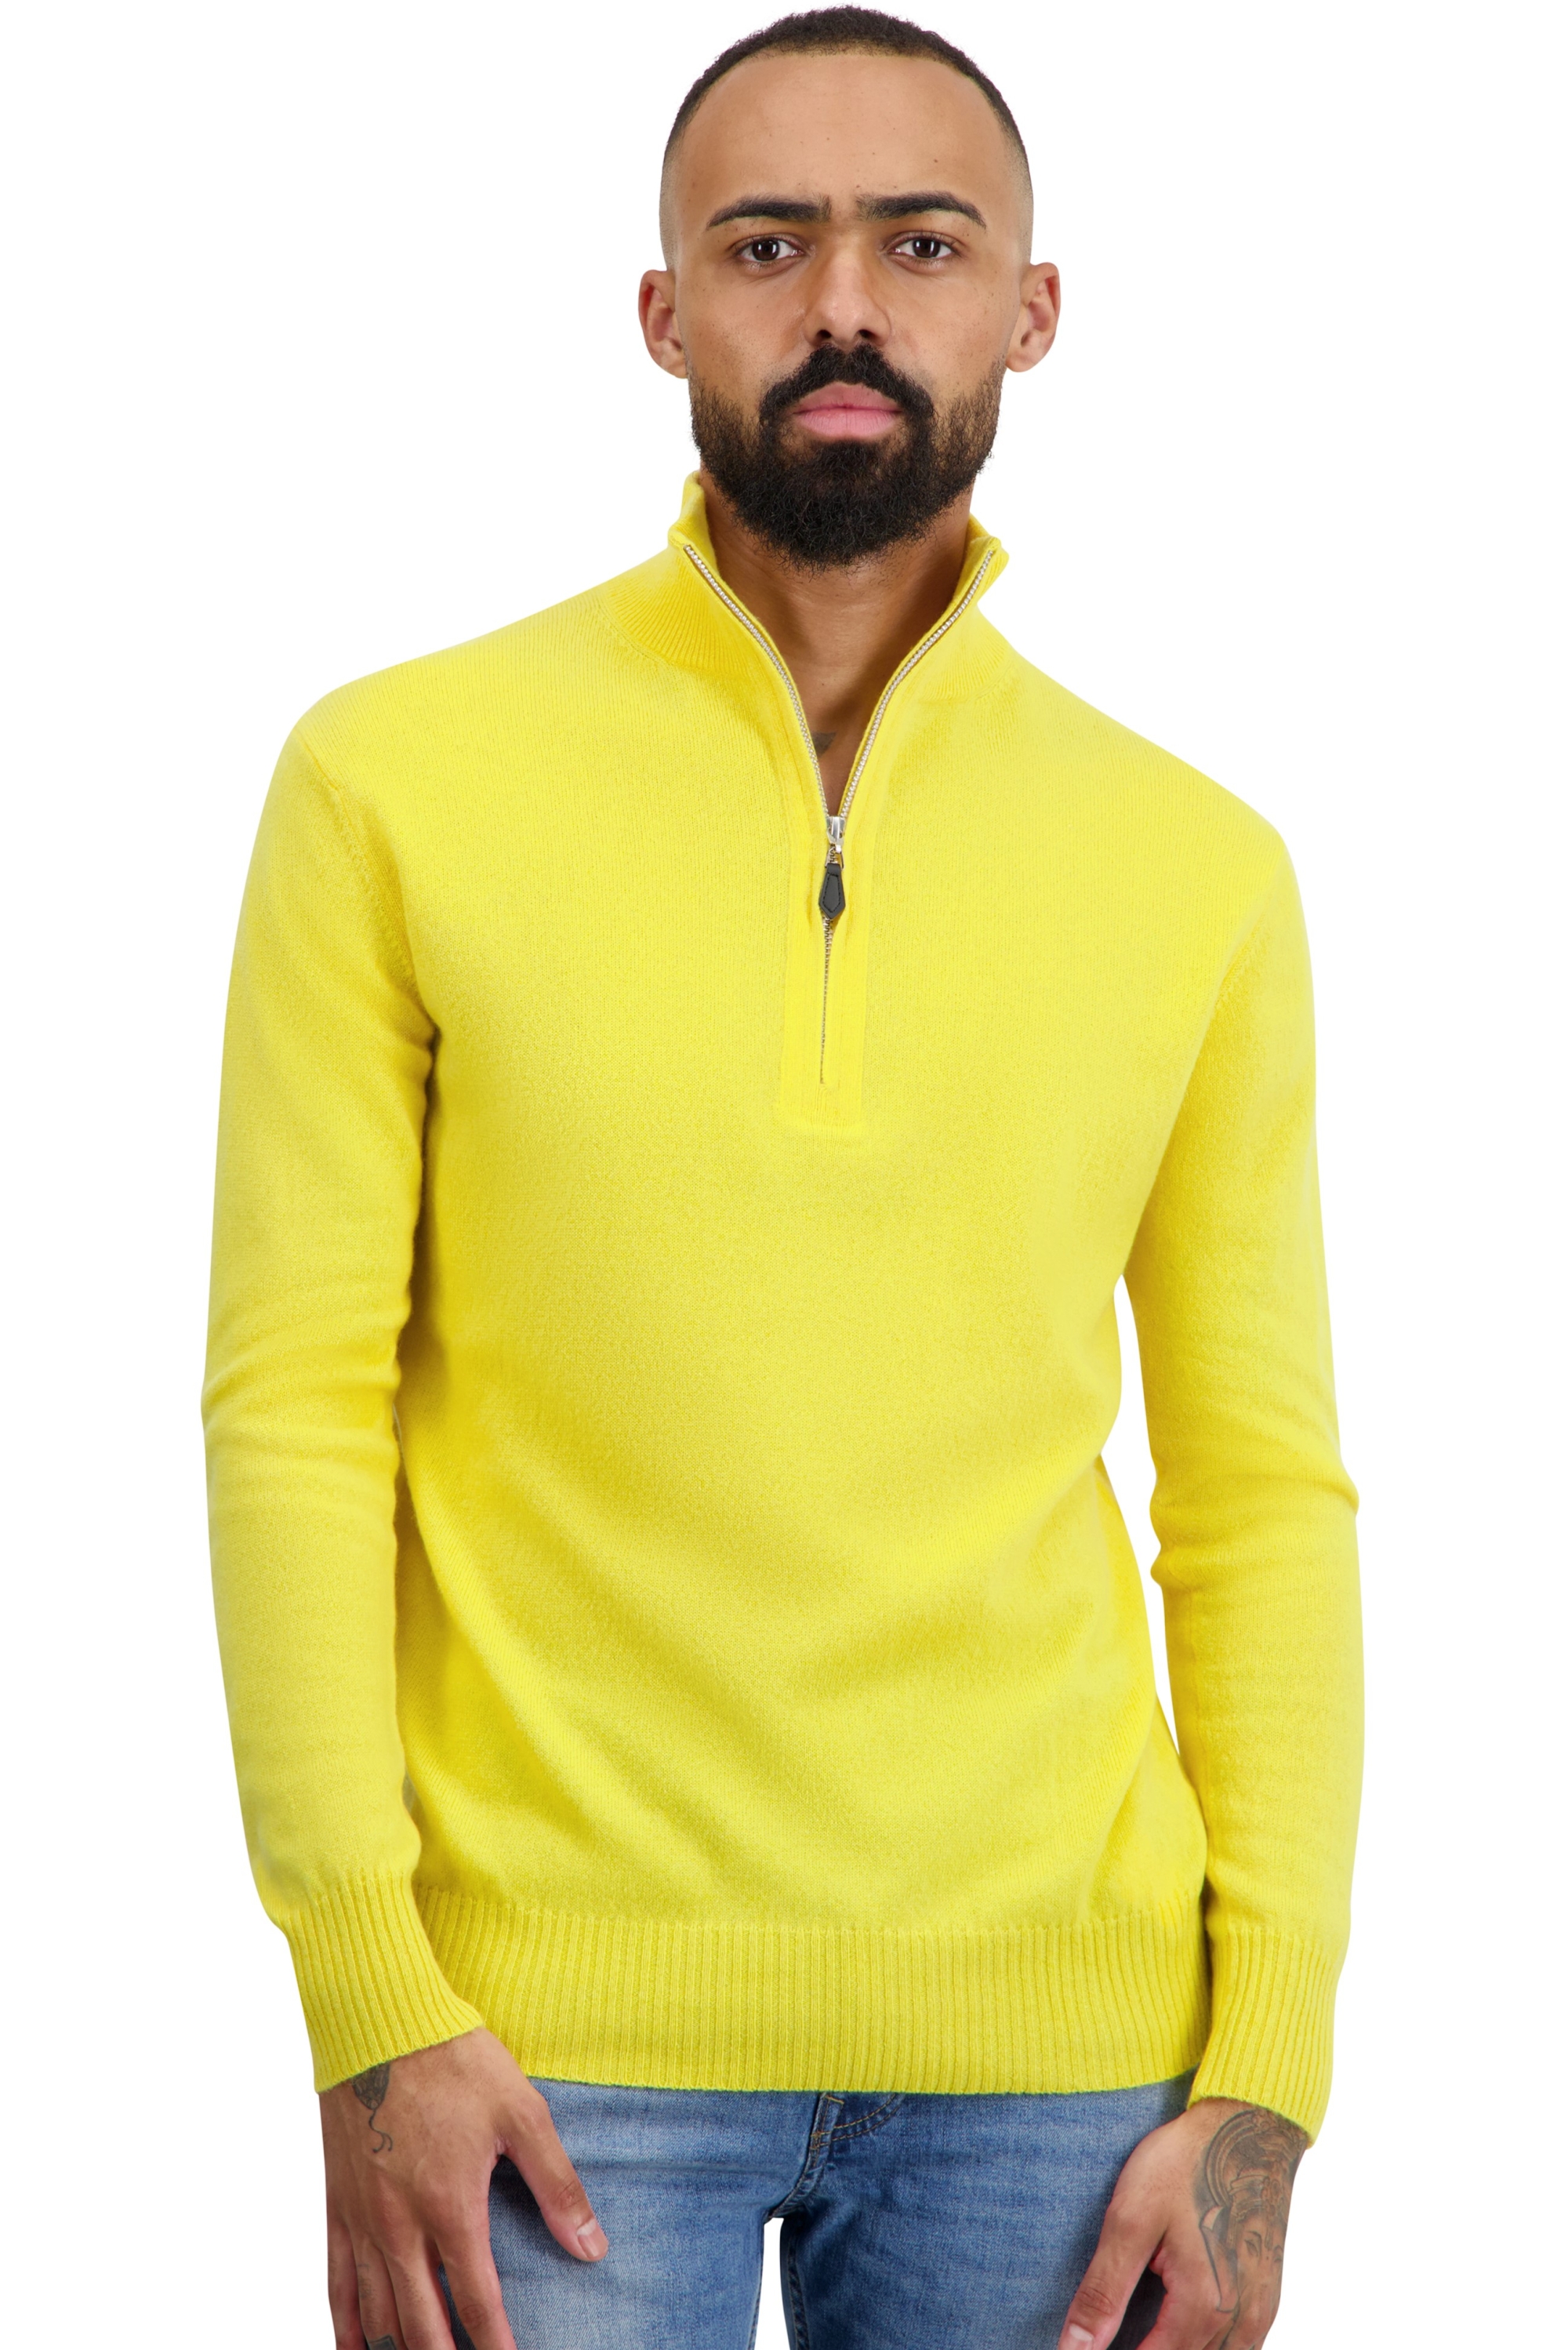 Cashmere men basic sweaters at low prices toulon first daffodil s